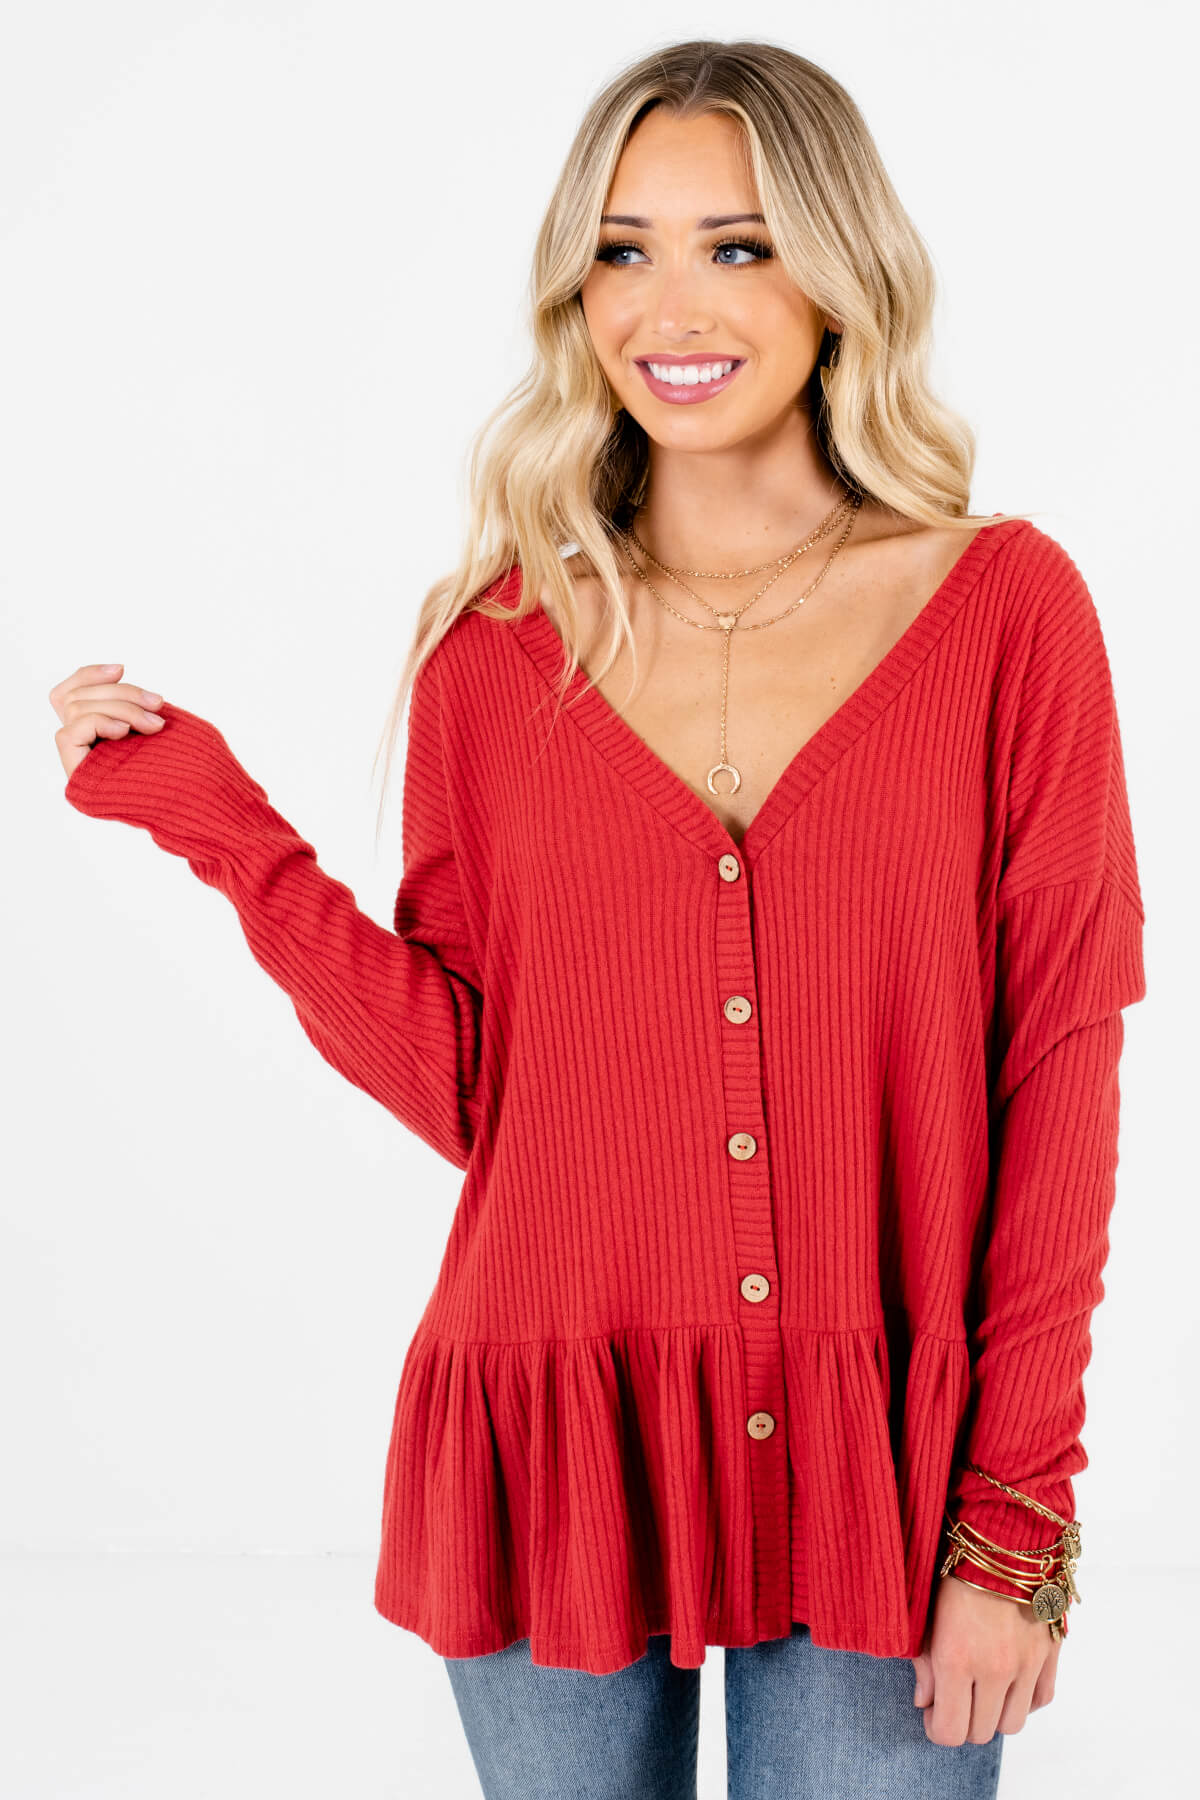 Red Wooden Button-Up Front Boutique Tops for Women